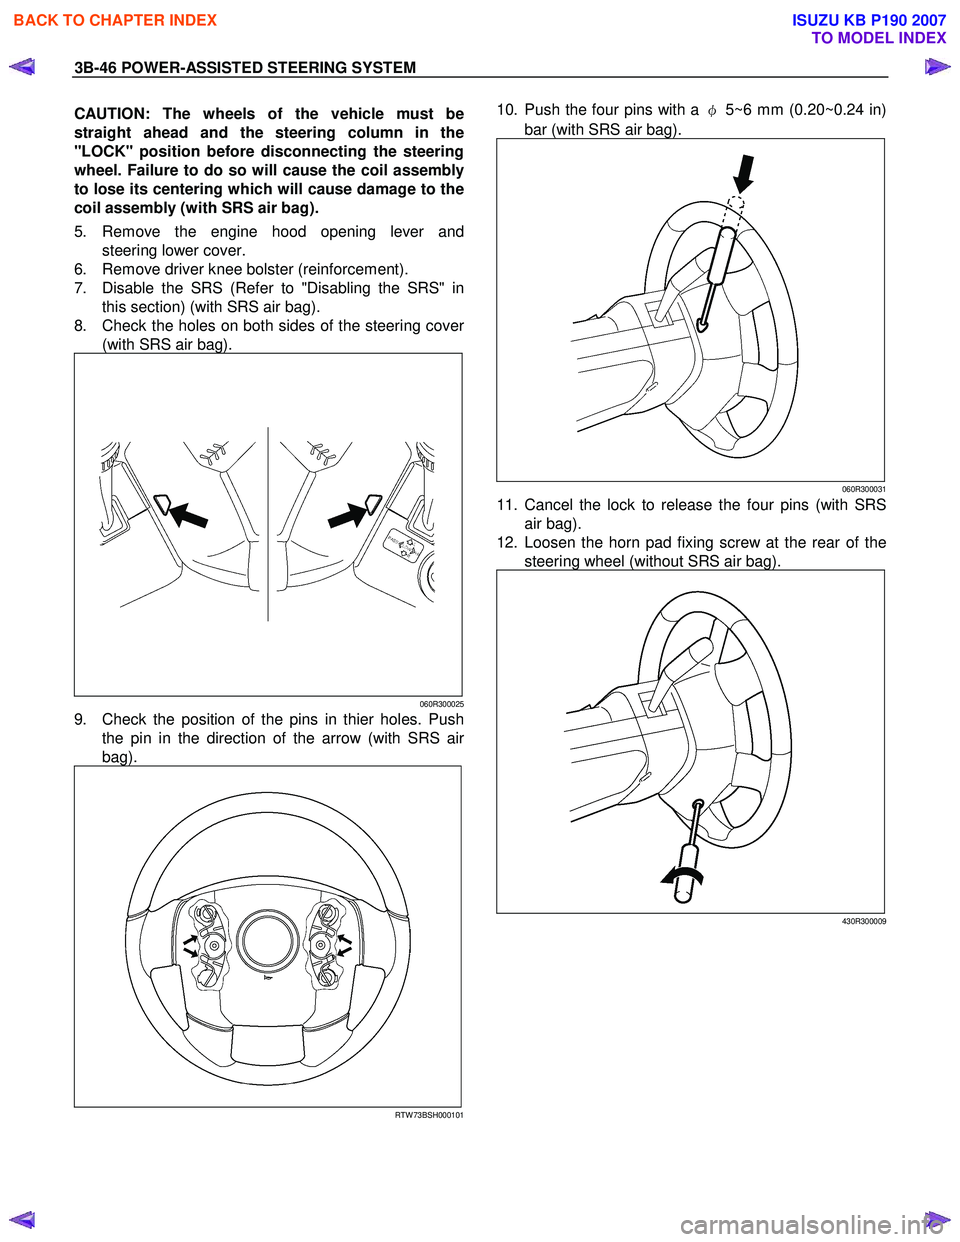 ISUZU KB P190 2007  Workshop Service Manual 3B-46 POWER-ASSISTED STEERING SYSTEM 
CAUTION: The wheels of the vehicle must be  
straight ahead and the steering column in the
"LOCK" position before disconnecting the steering
wheel. Failure to do 